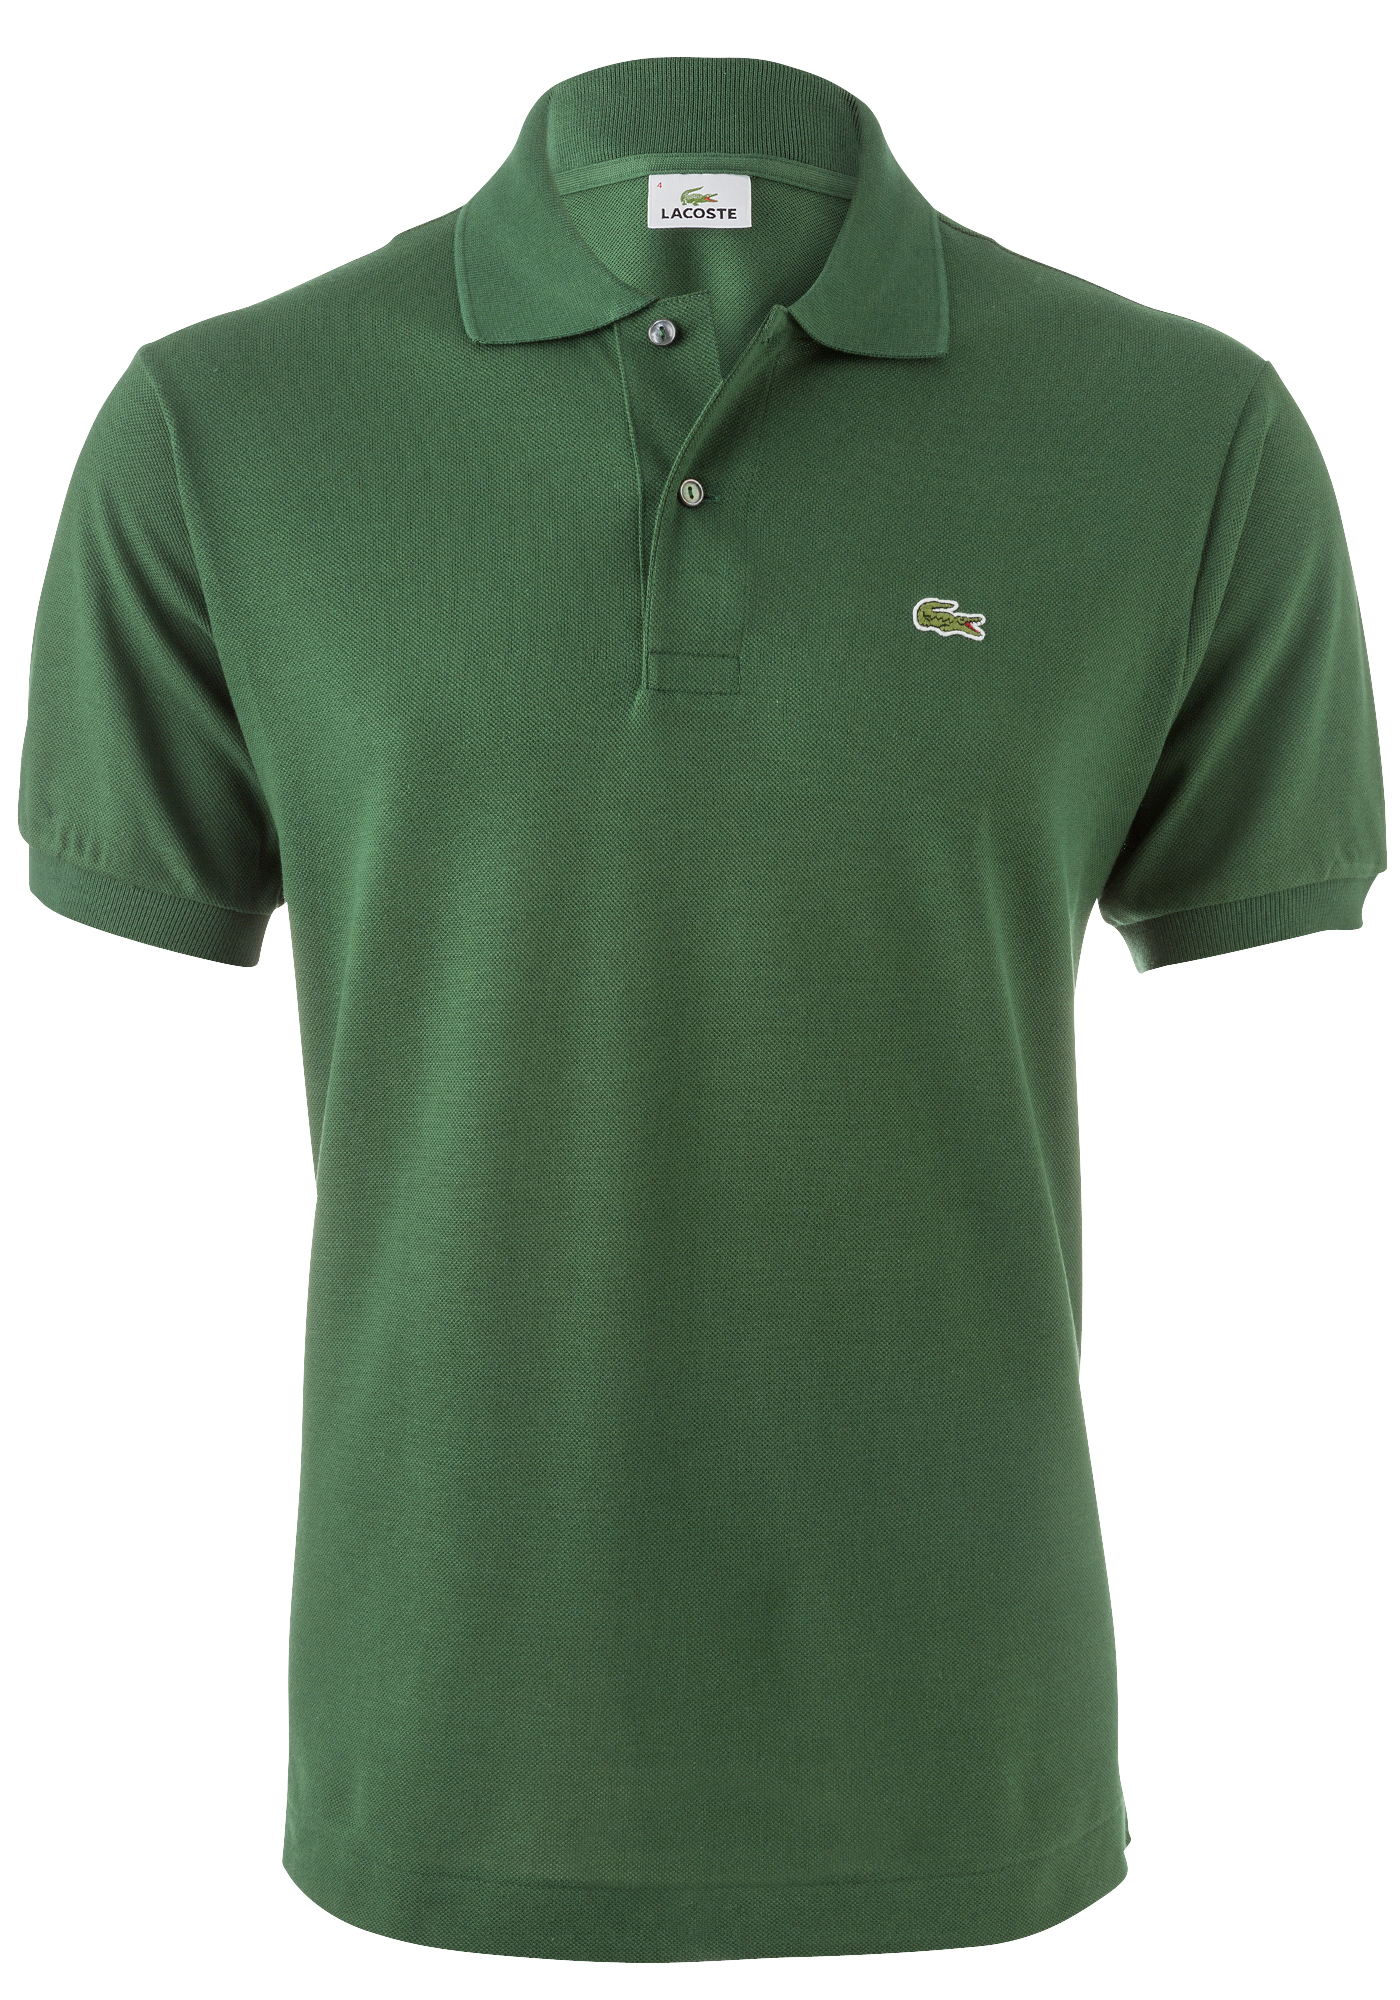 Lacoste Classic Fit polo, donker groen